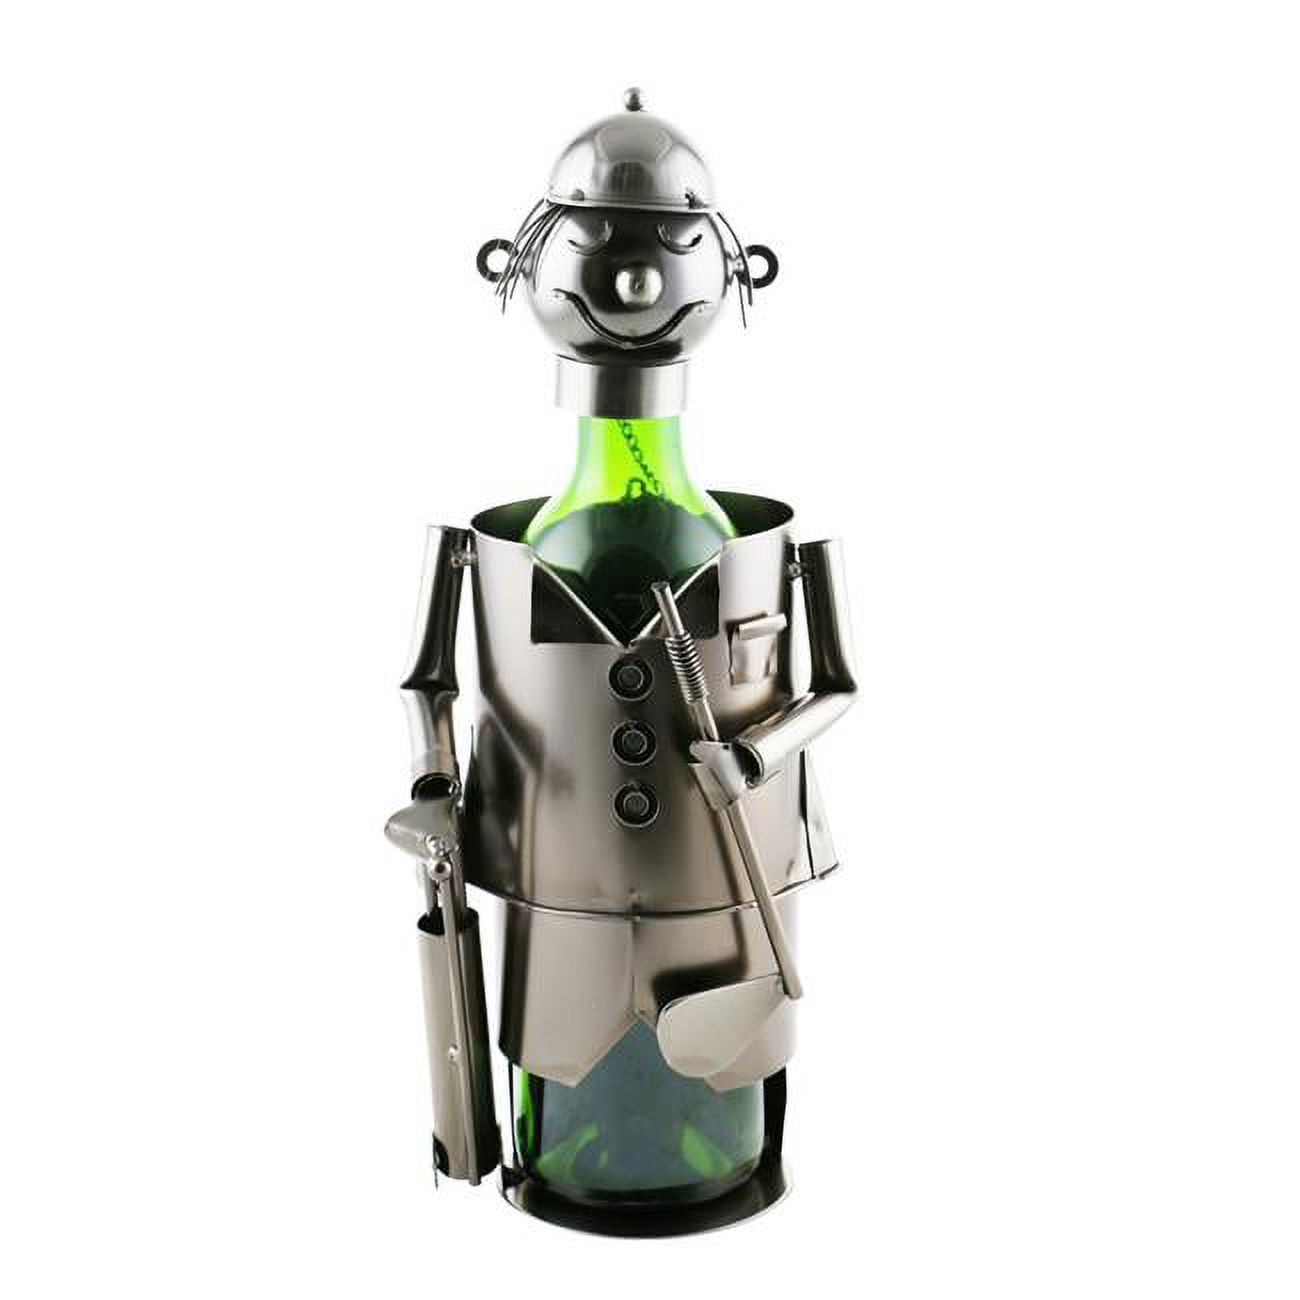 Wine Bottle Holder Wine Rack Golfer with Golf Clubs Bar Decor in Silver Kitchen Gift - image 1 of 2